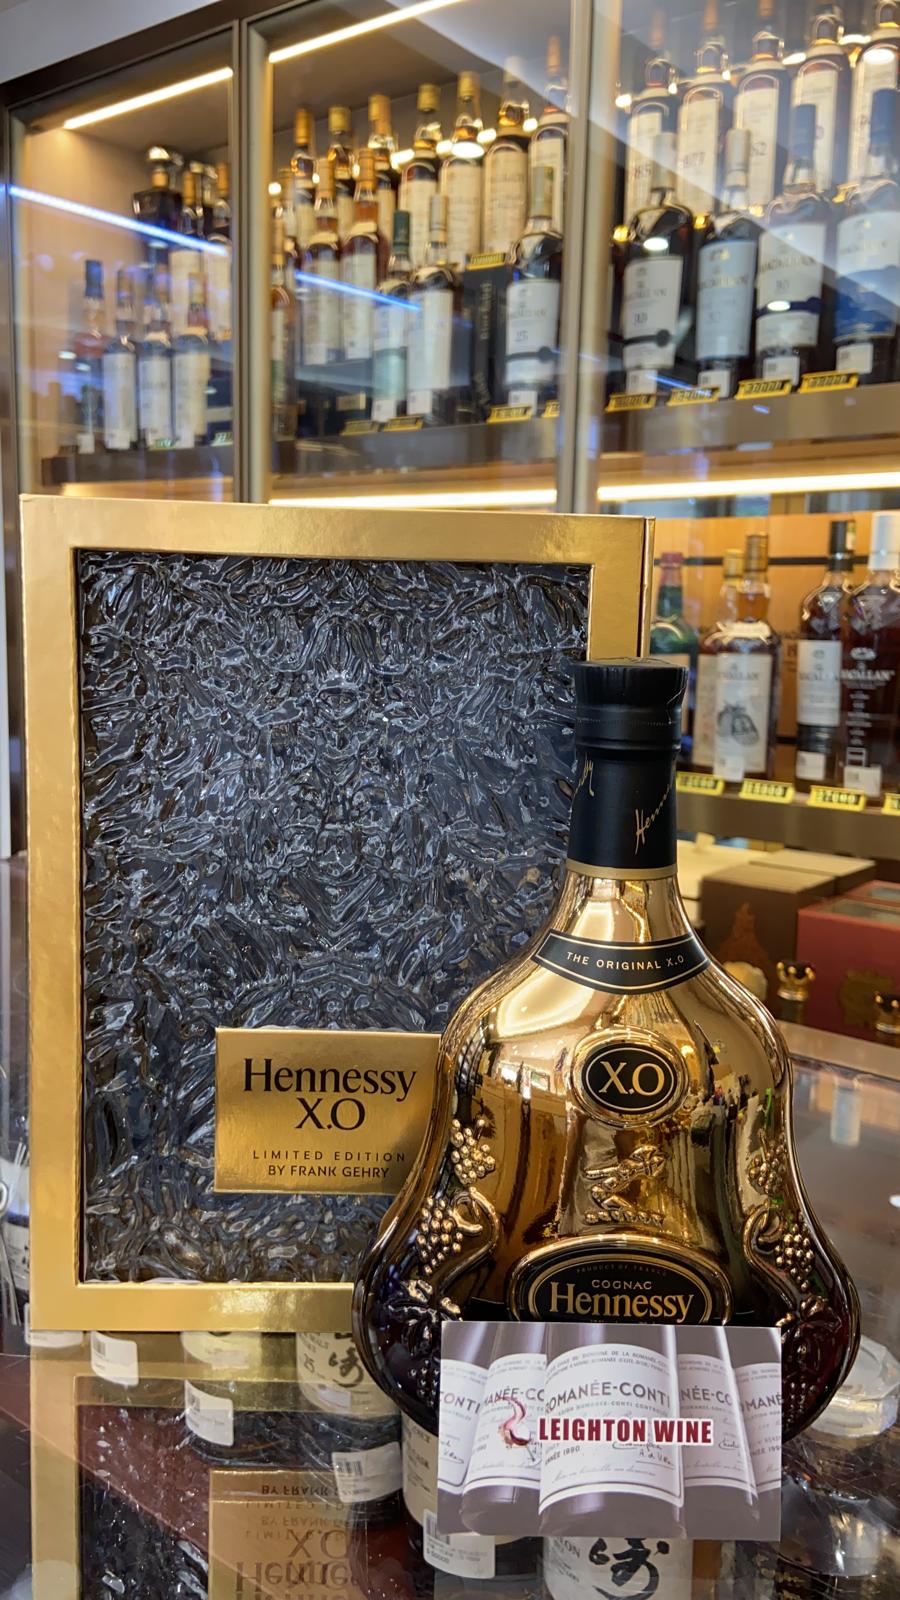 HENNESSY  Frank Gehry Limited Edition X.O. Cognac 700ml/40%